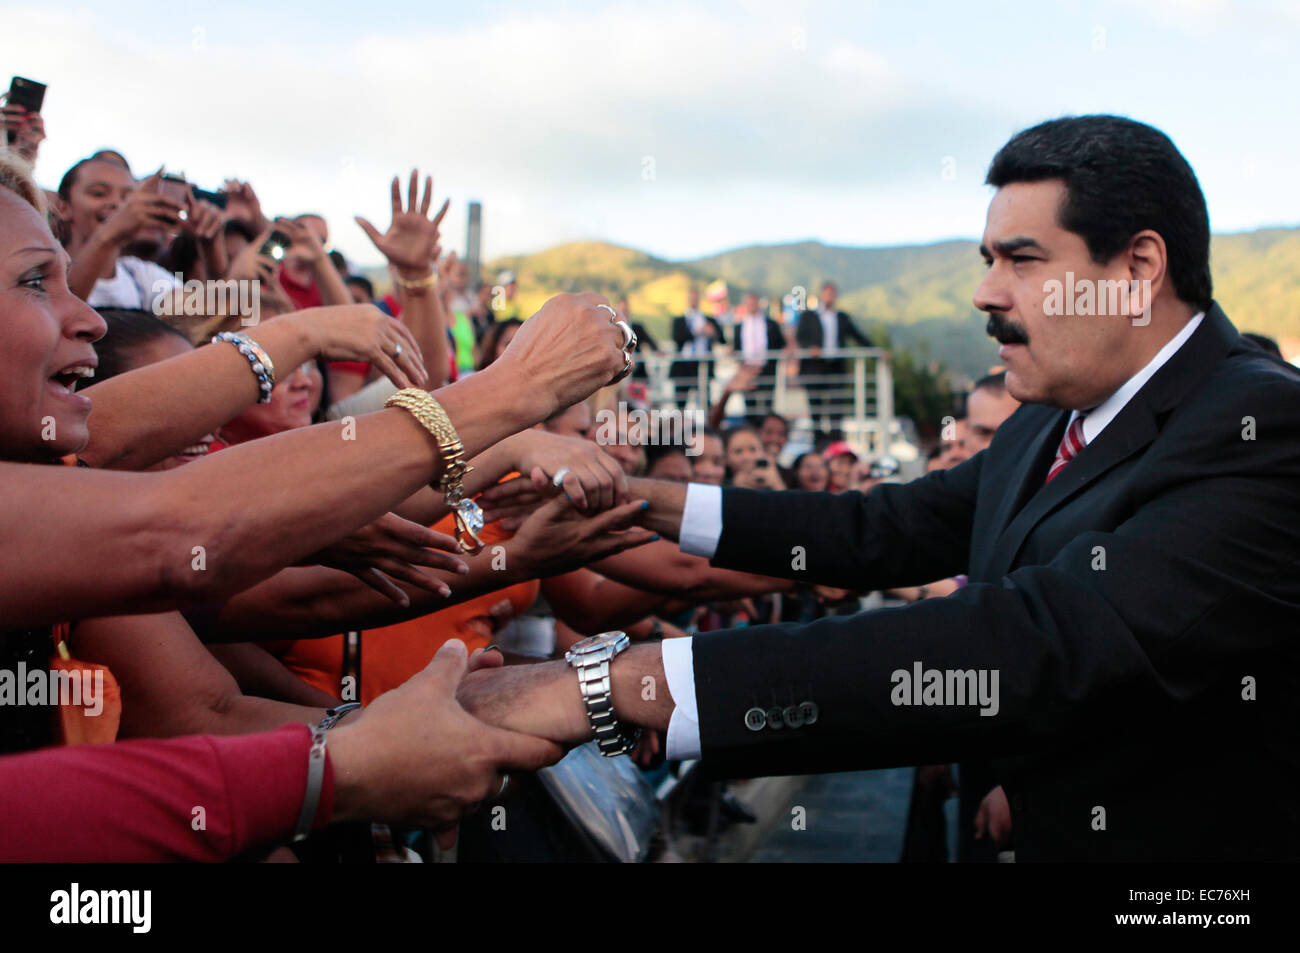 Caracas, Venezuela. 9th Dec, 2014. Image provided by Venezuela's Presidency shows Venezuelan President Nicolas Maduro (R) meeting with people ahead of a ceremony marking the 190th anniversary of the Battle of Ayacucho, at the National Pantheon in Caracas, Venezuela, on Dec. 9, 2014. © Venezuela's Presidency/Xinhua/Alamy Live News Stock Photo